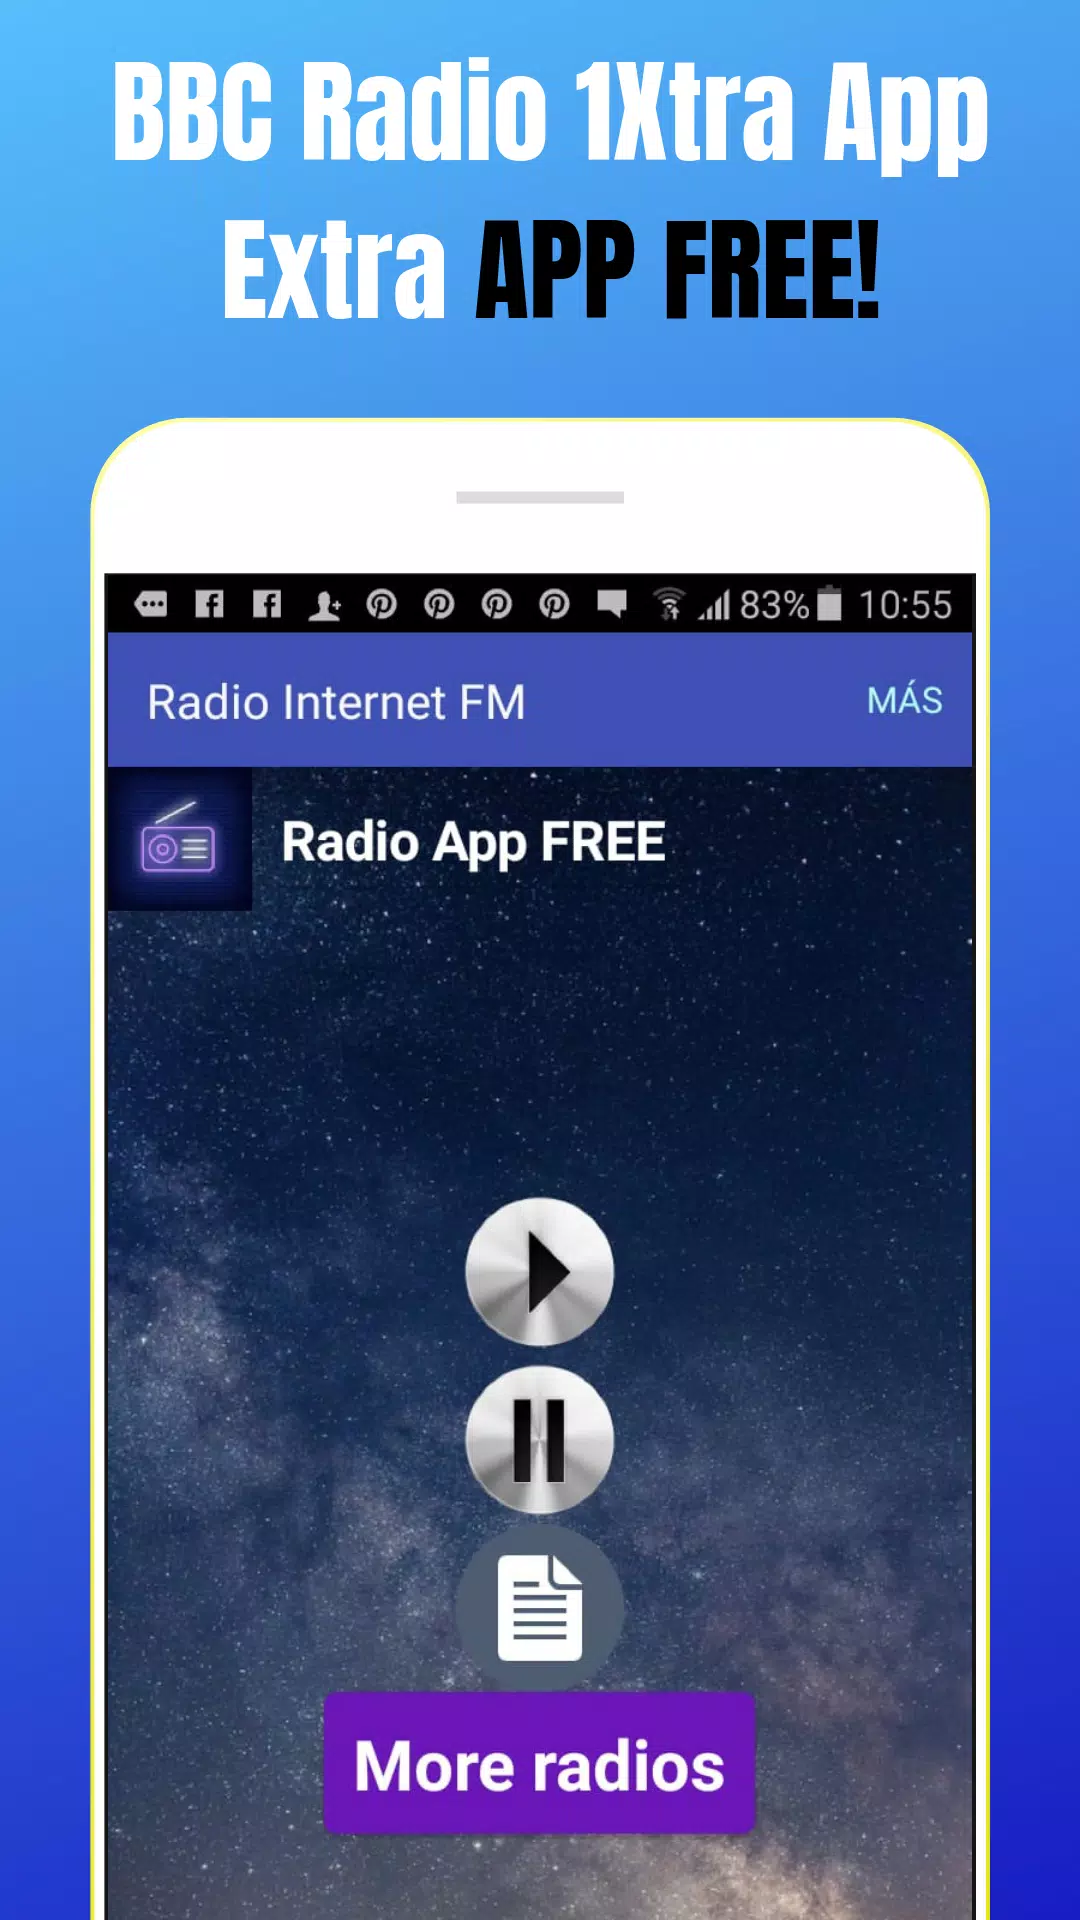 BBC Radio 1Xtra App Extra Player Free Online UK APK pour Android Télécharger